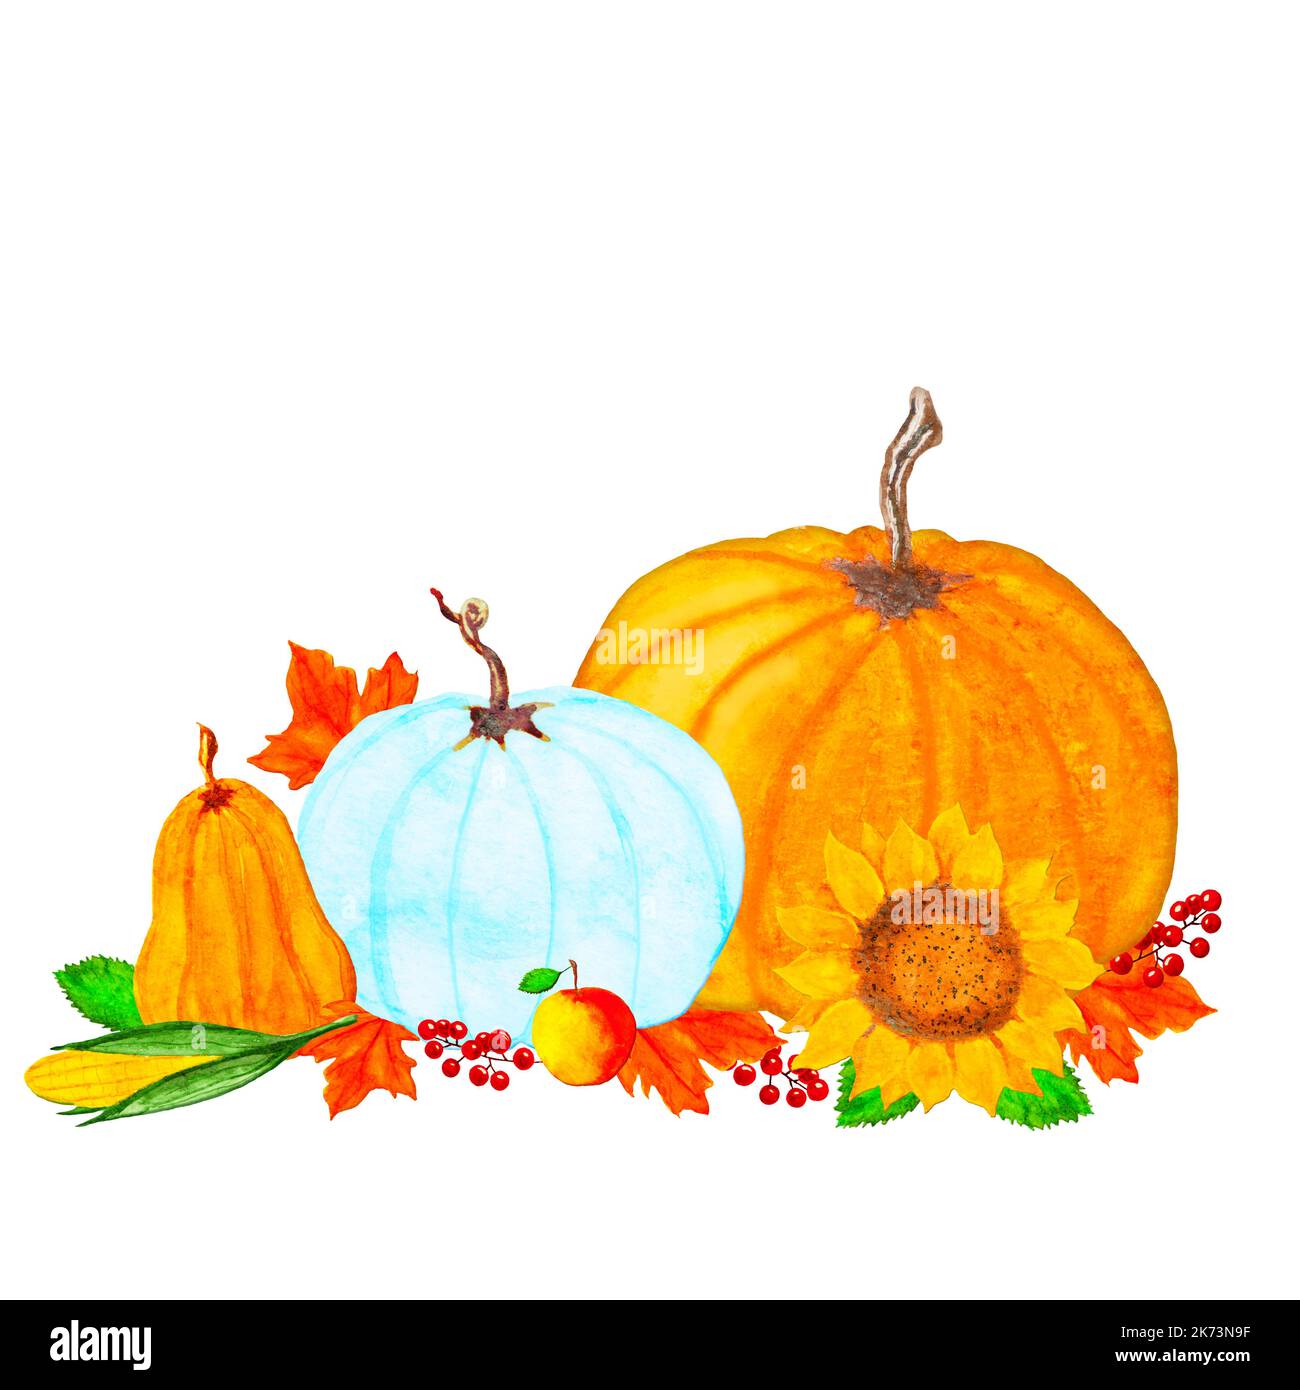 Thanksgiving background, watercolor pumpkins, autumn leaves, berries on white background, watercolor raster Thanksgiving illustration Stock Photo